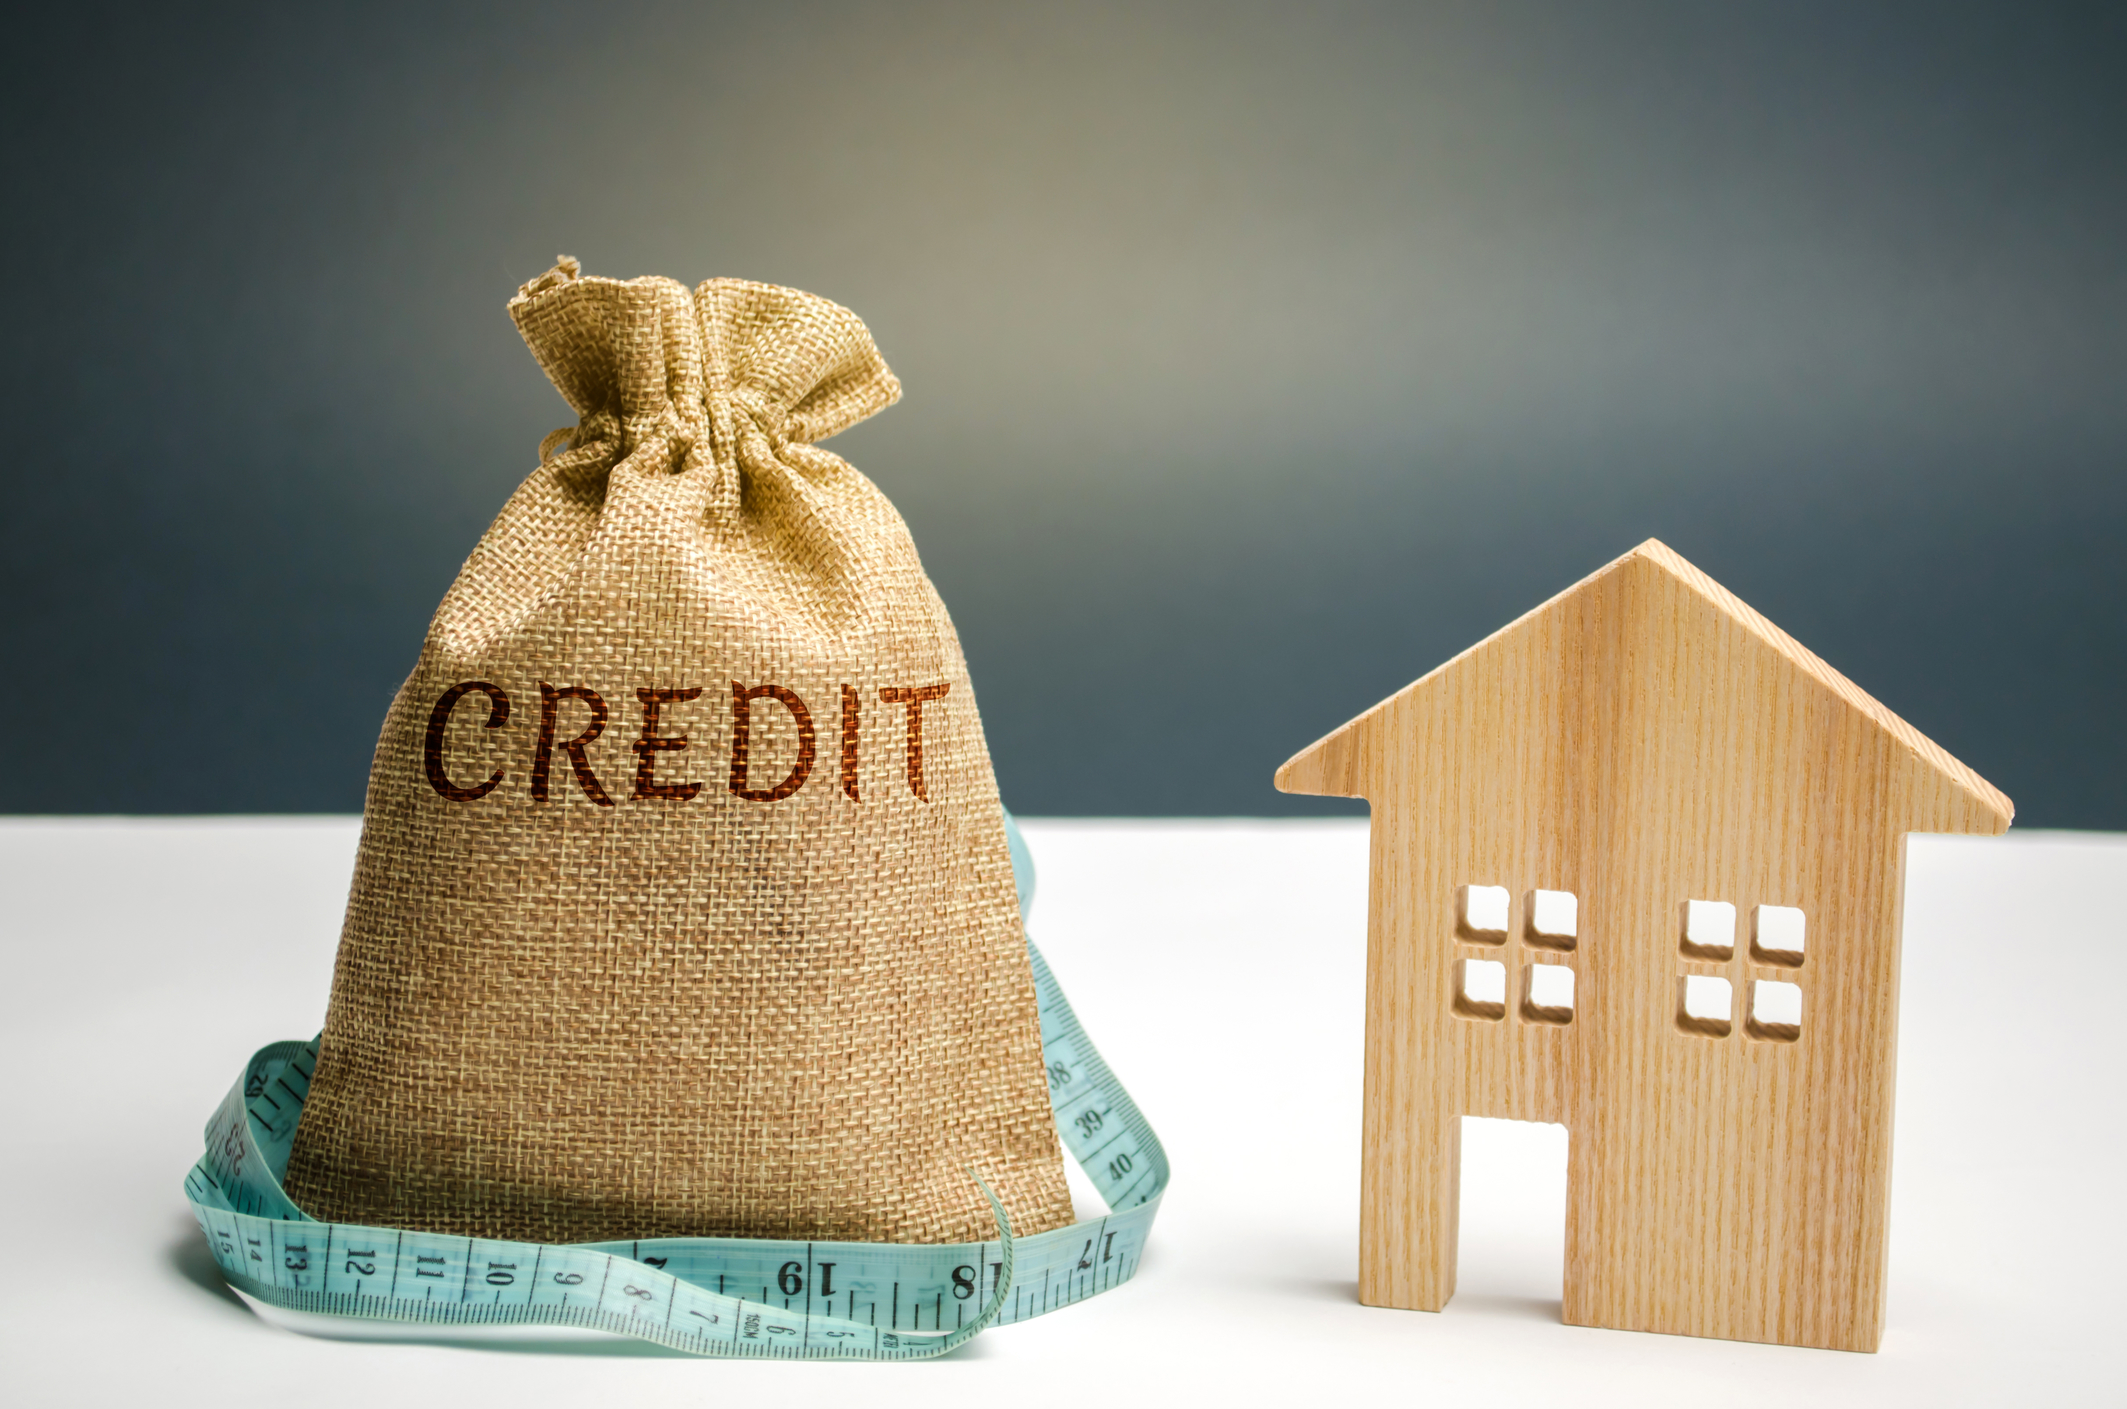 What to Do When You Need Home Loans for Low Credit Scores in Chicago, IL?